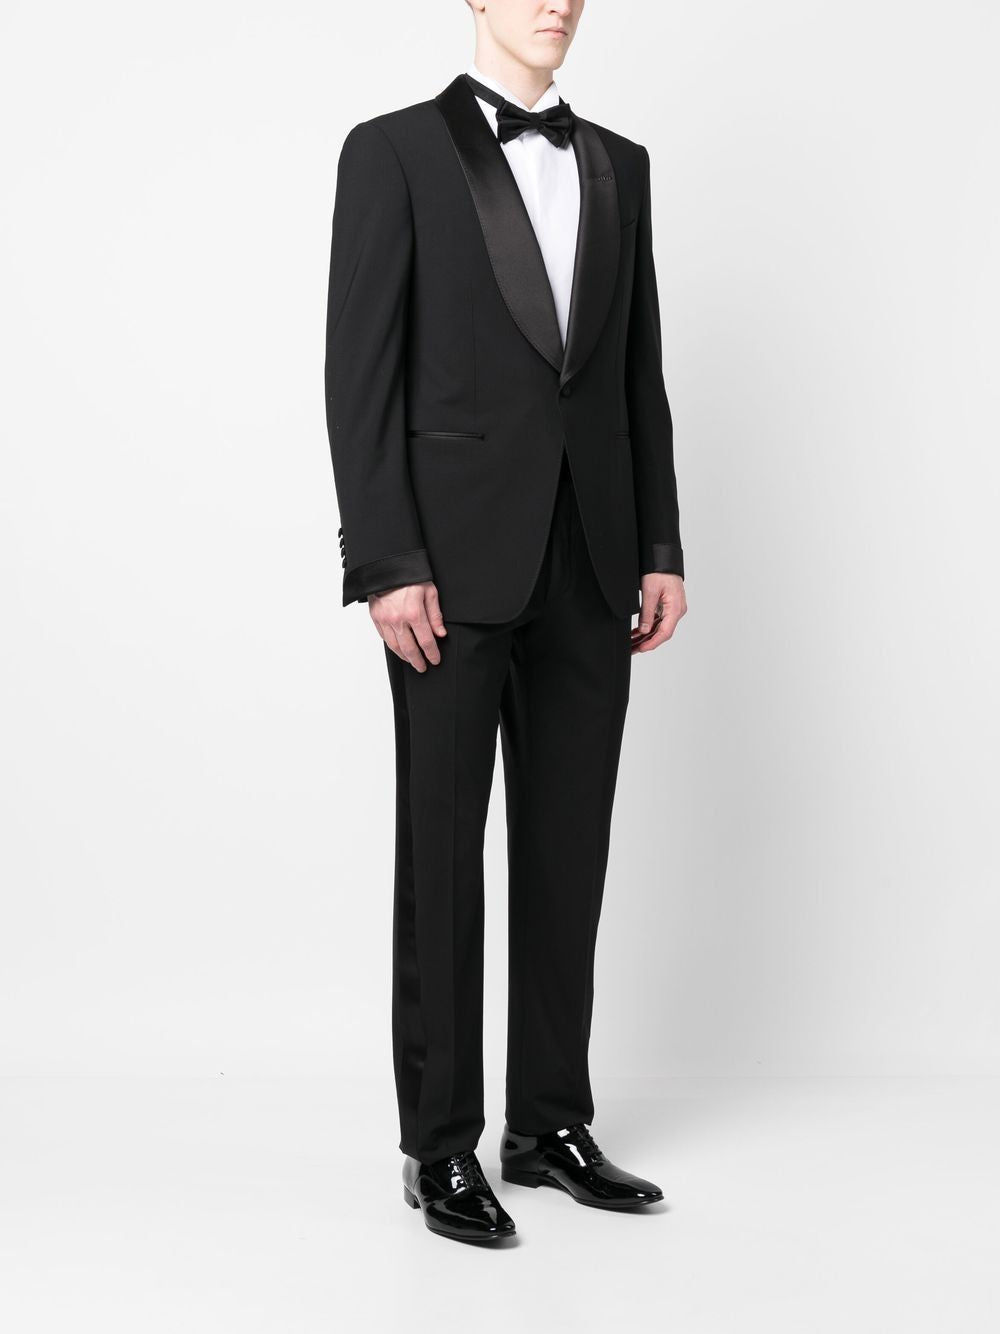 Single Breasted Suit for Men - High Quality Wool | TOM FORD